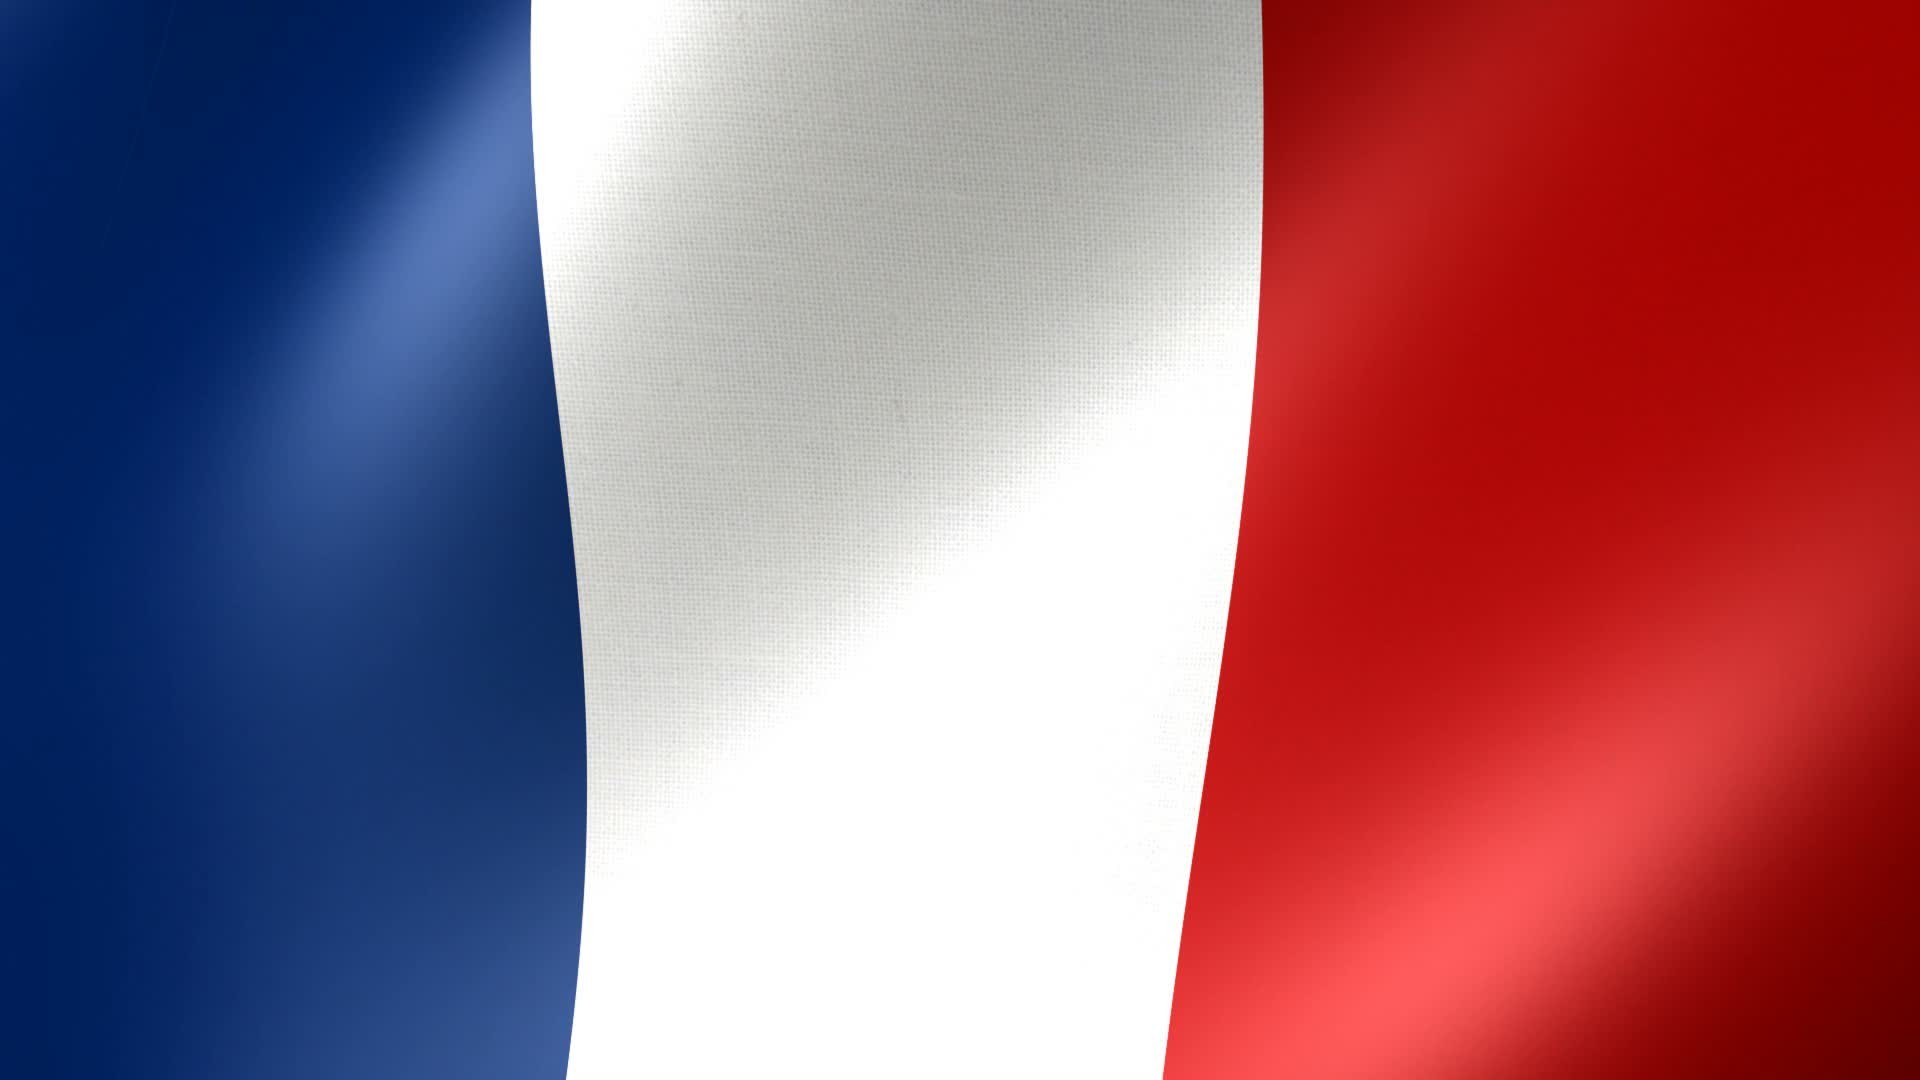 1920x1080 px The French Flag HD Wallpaper 500963 